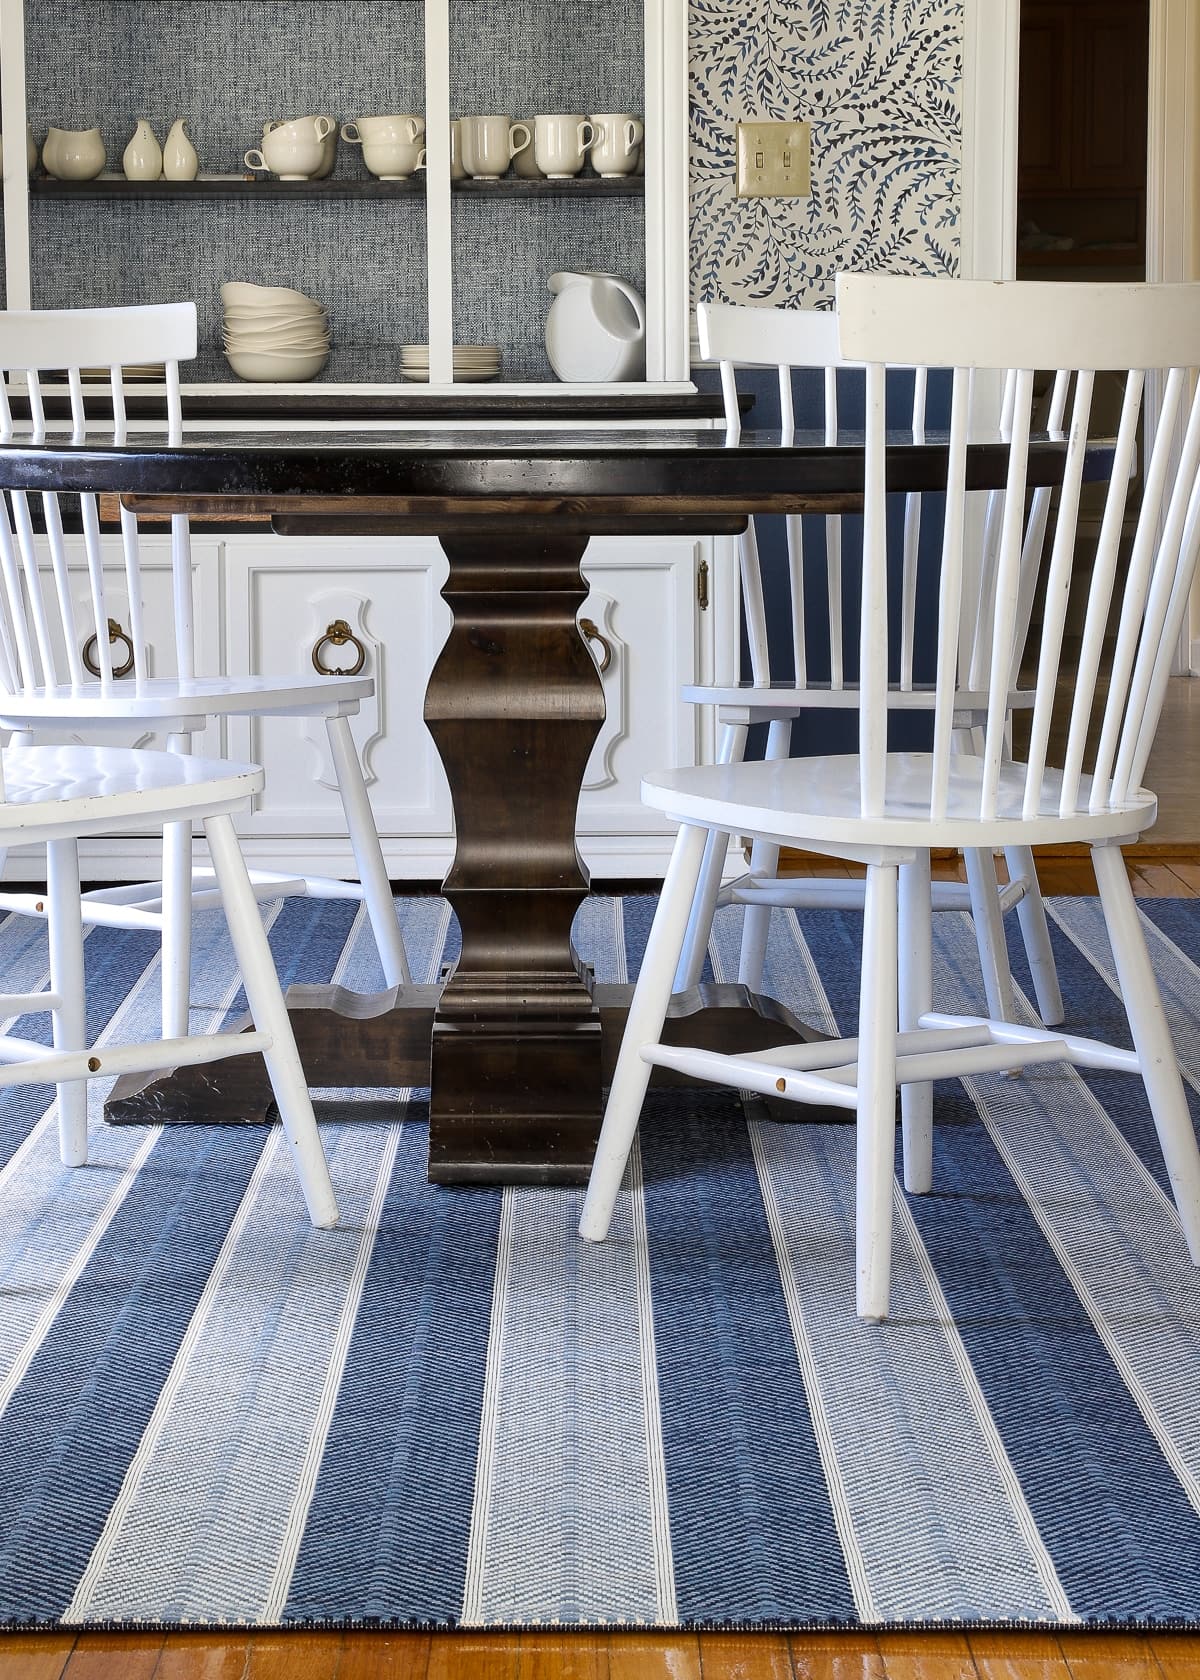 A Rug Under the Kitchen Table  Practical Ideas for Making It Work - The  Homes I Have Made